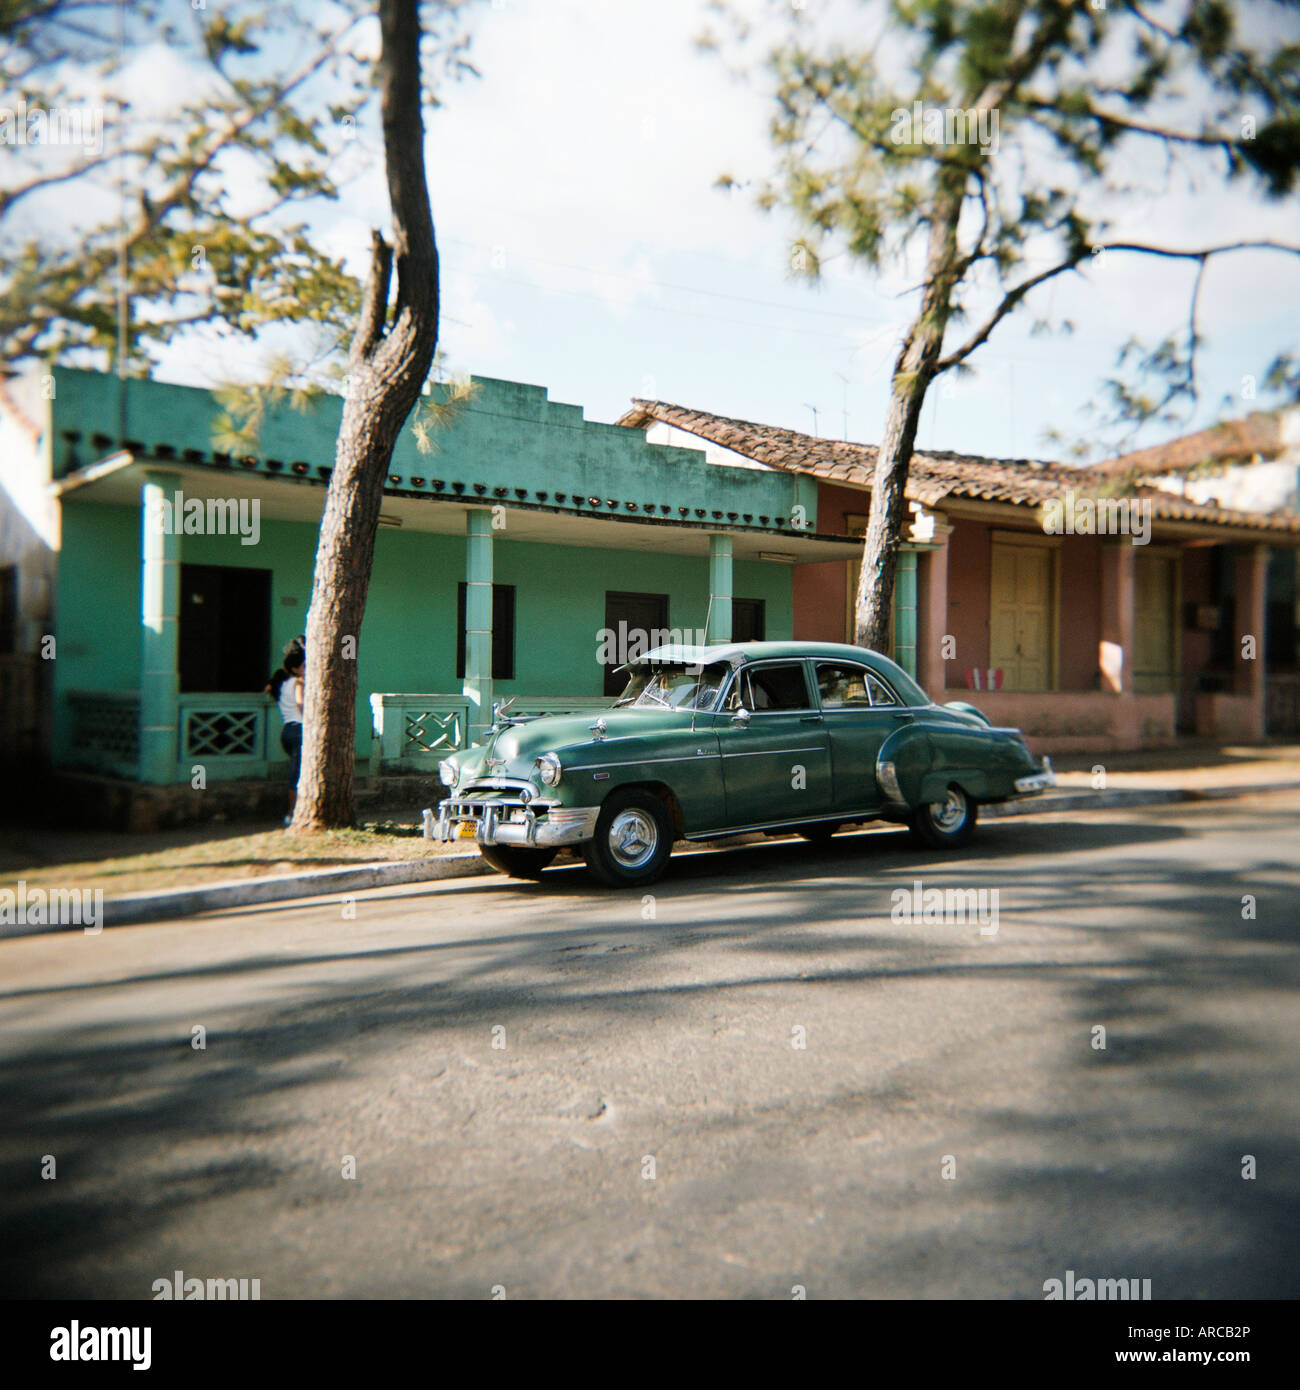 Old green American car, Vinales, Cuba, West Indies, Central America Stock Photo